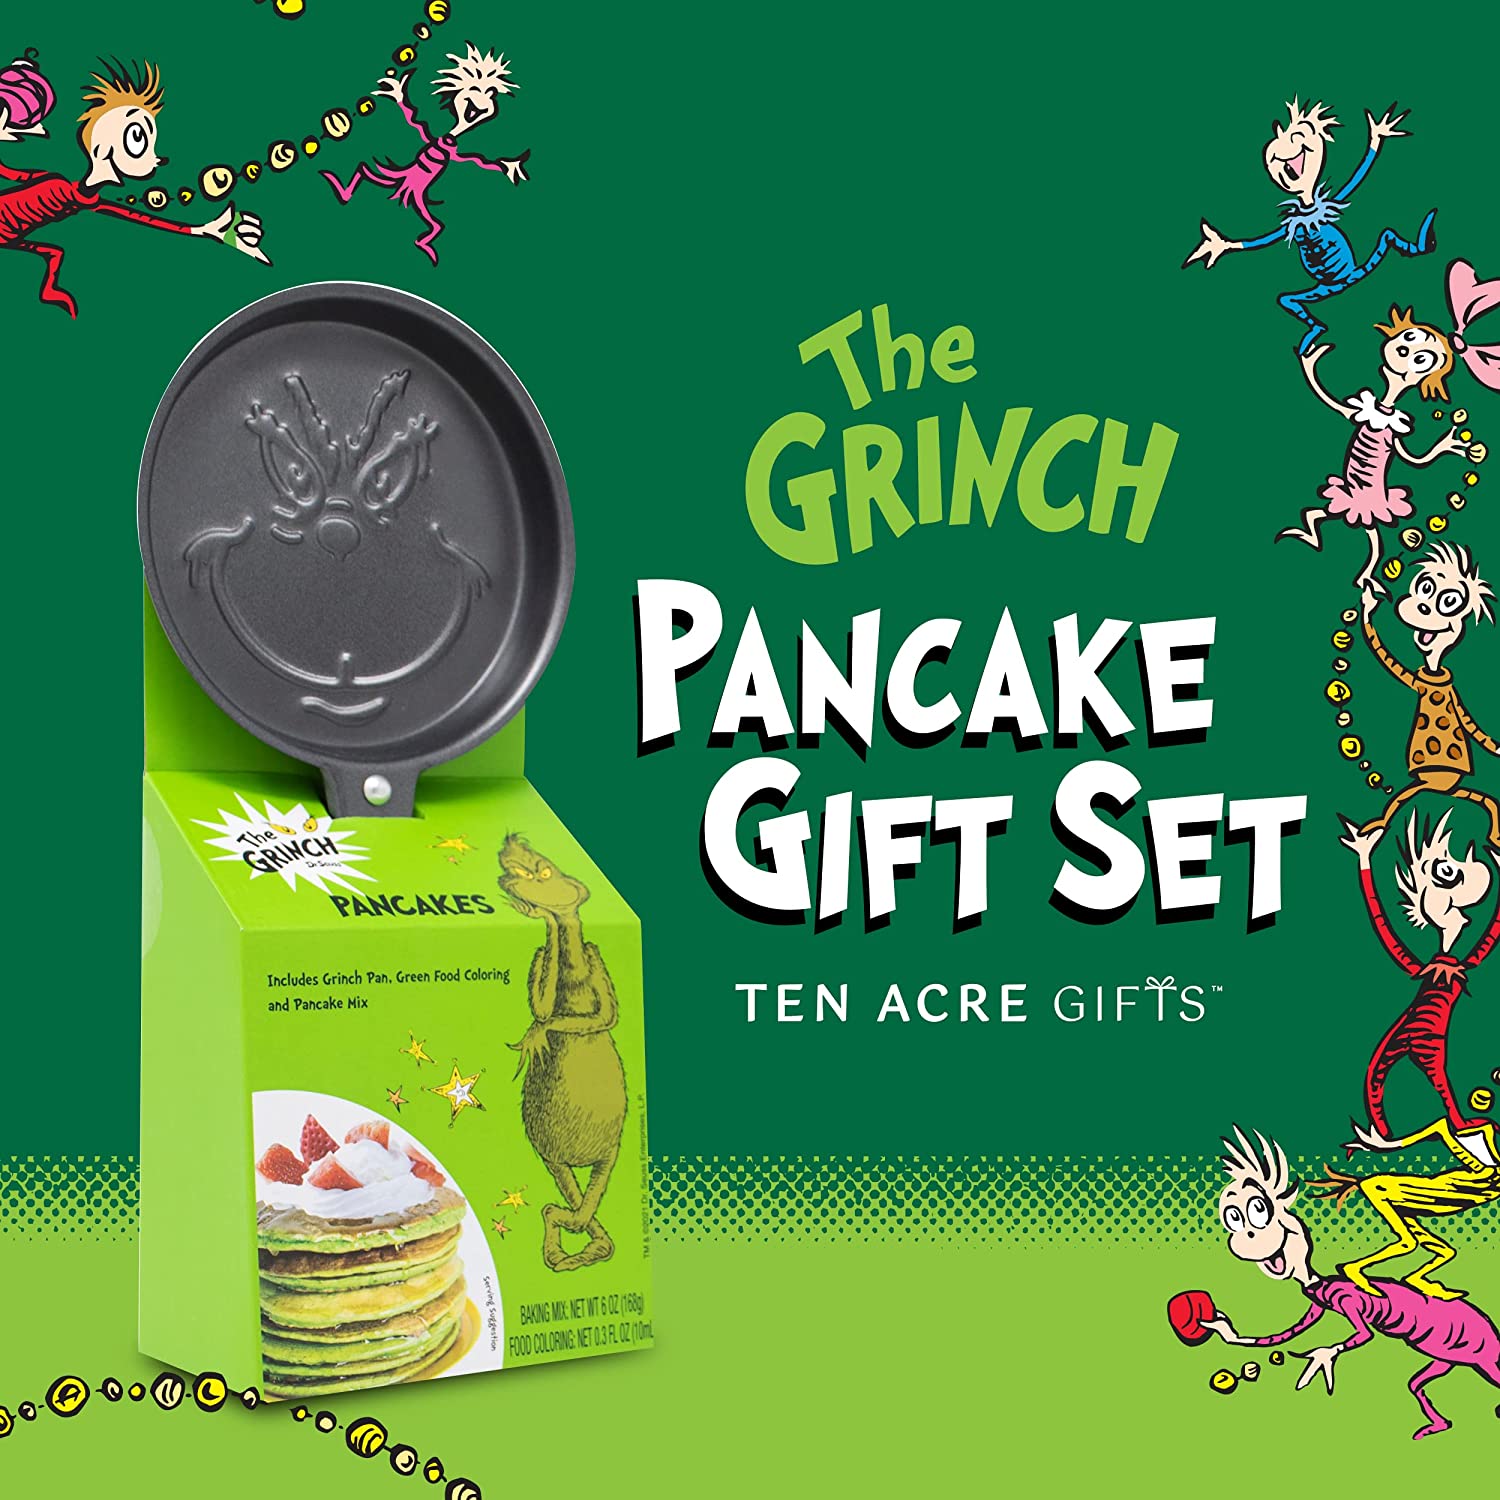 How The Grinch Stole Christmas Whoville Waffle Maker w/ Box, instructions